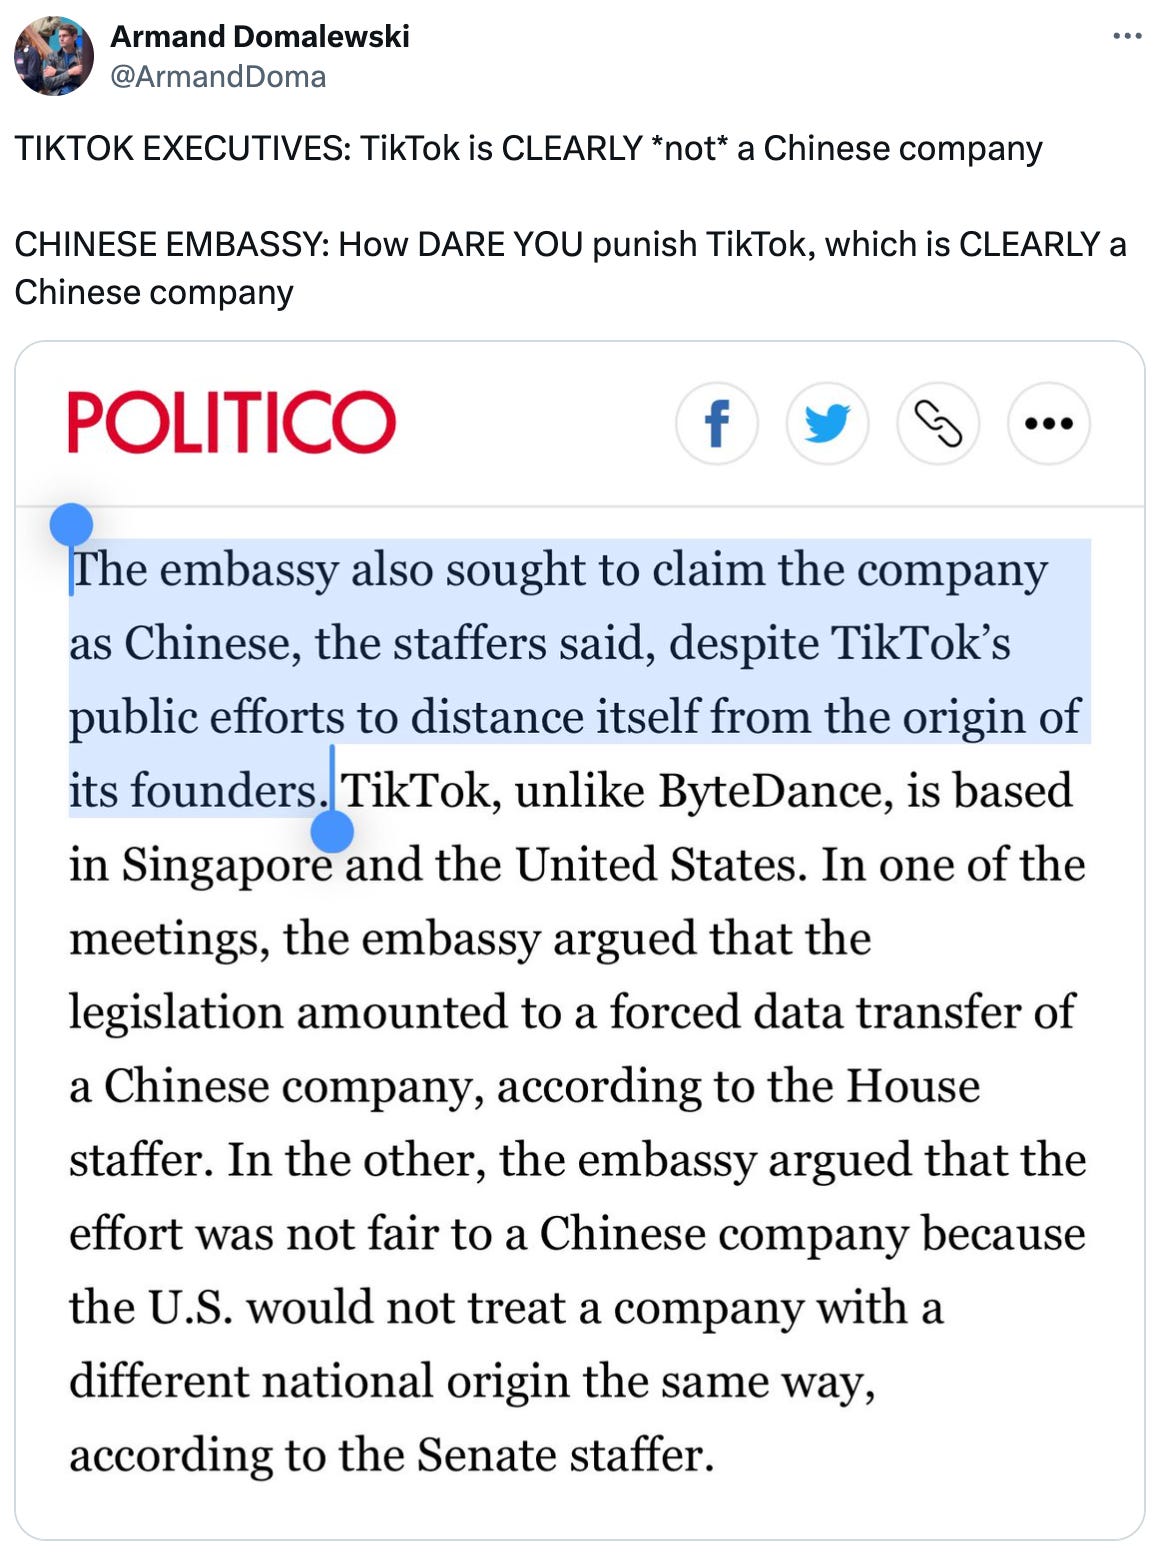  See new posts Conversation Armand Domalewski @ArmandDoma TIKTOK EXECUTIVES: TikTok is CLEARLY *not* a Chinese company  CHINESE EMBASSY: How DARE YOU punish TikTok, which is CLEARLY a Chinese company